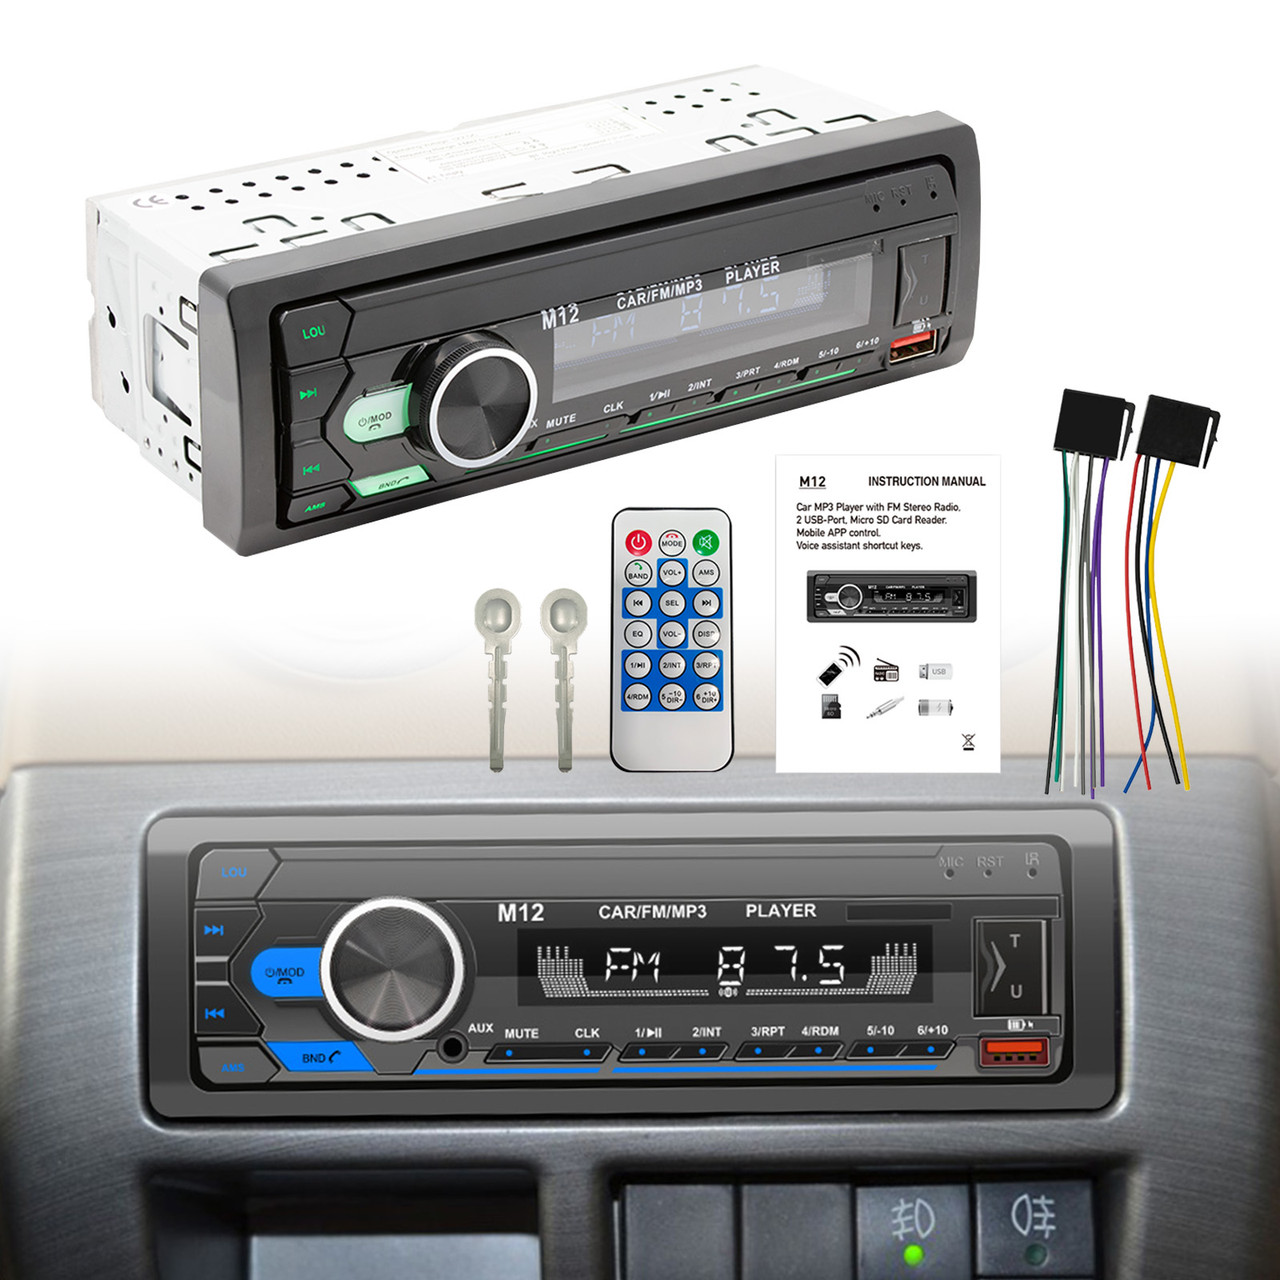 AI smart Bluetooth Stereo Radio FM Car MP3 Player Positioning to Find a Car